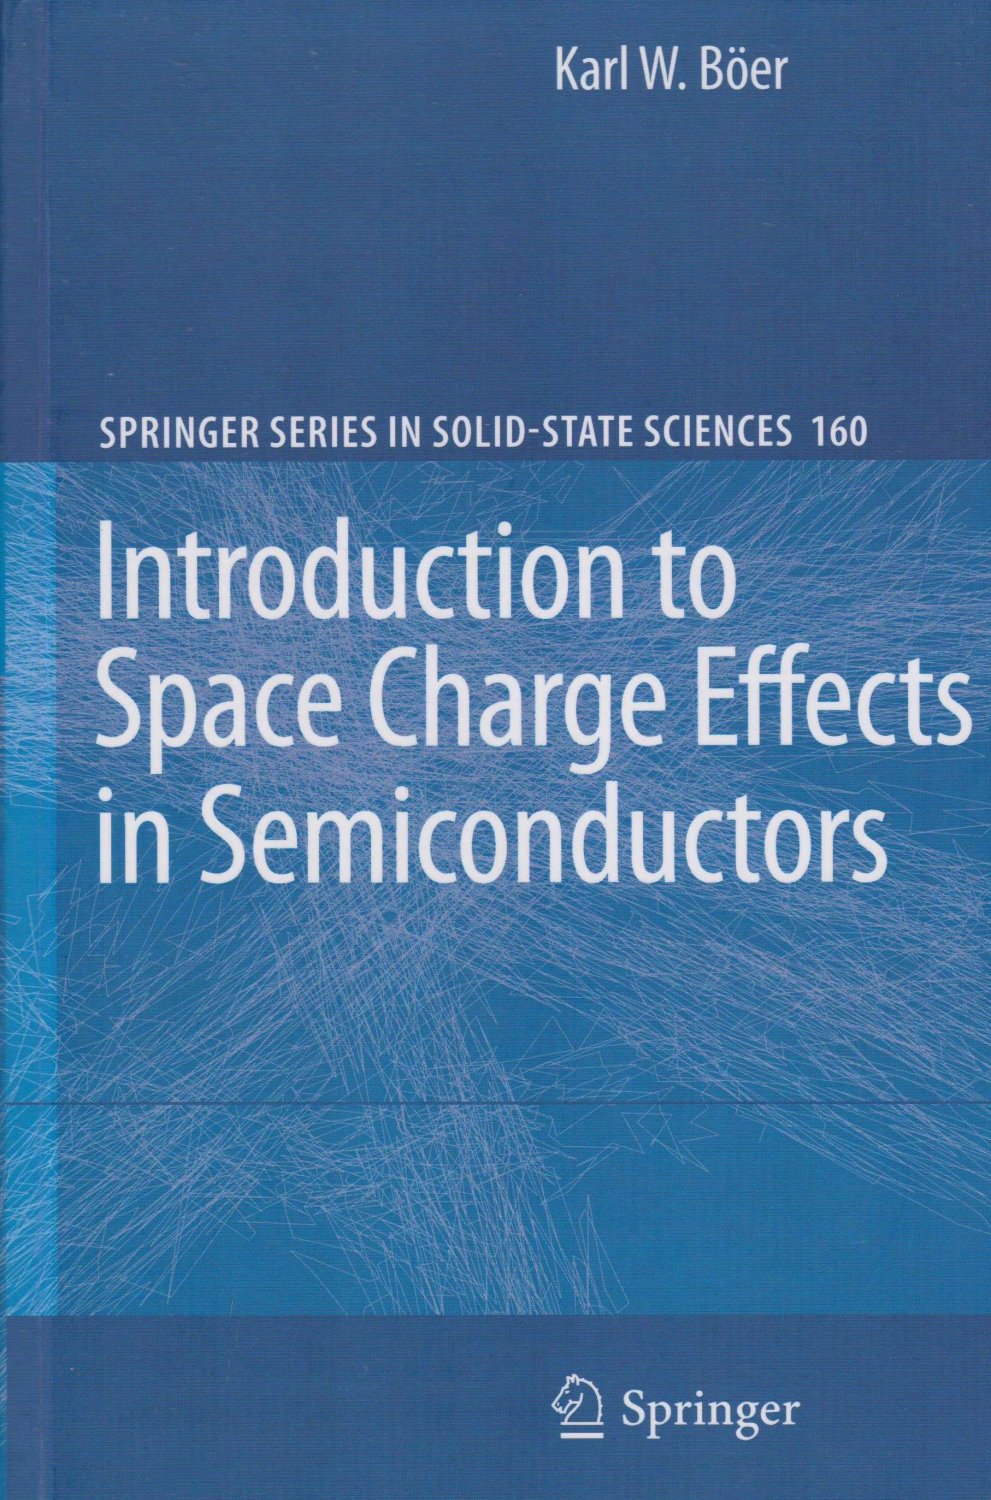 Introduction to Space Charge Effects in Semiconductors. (With dedication and …